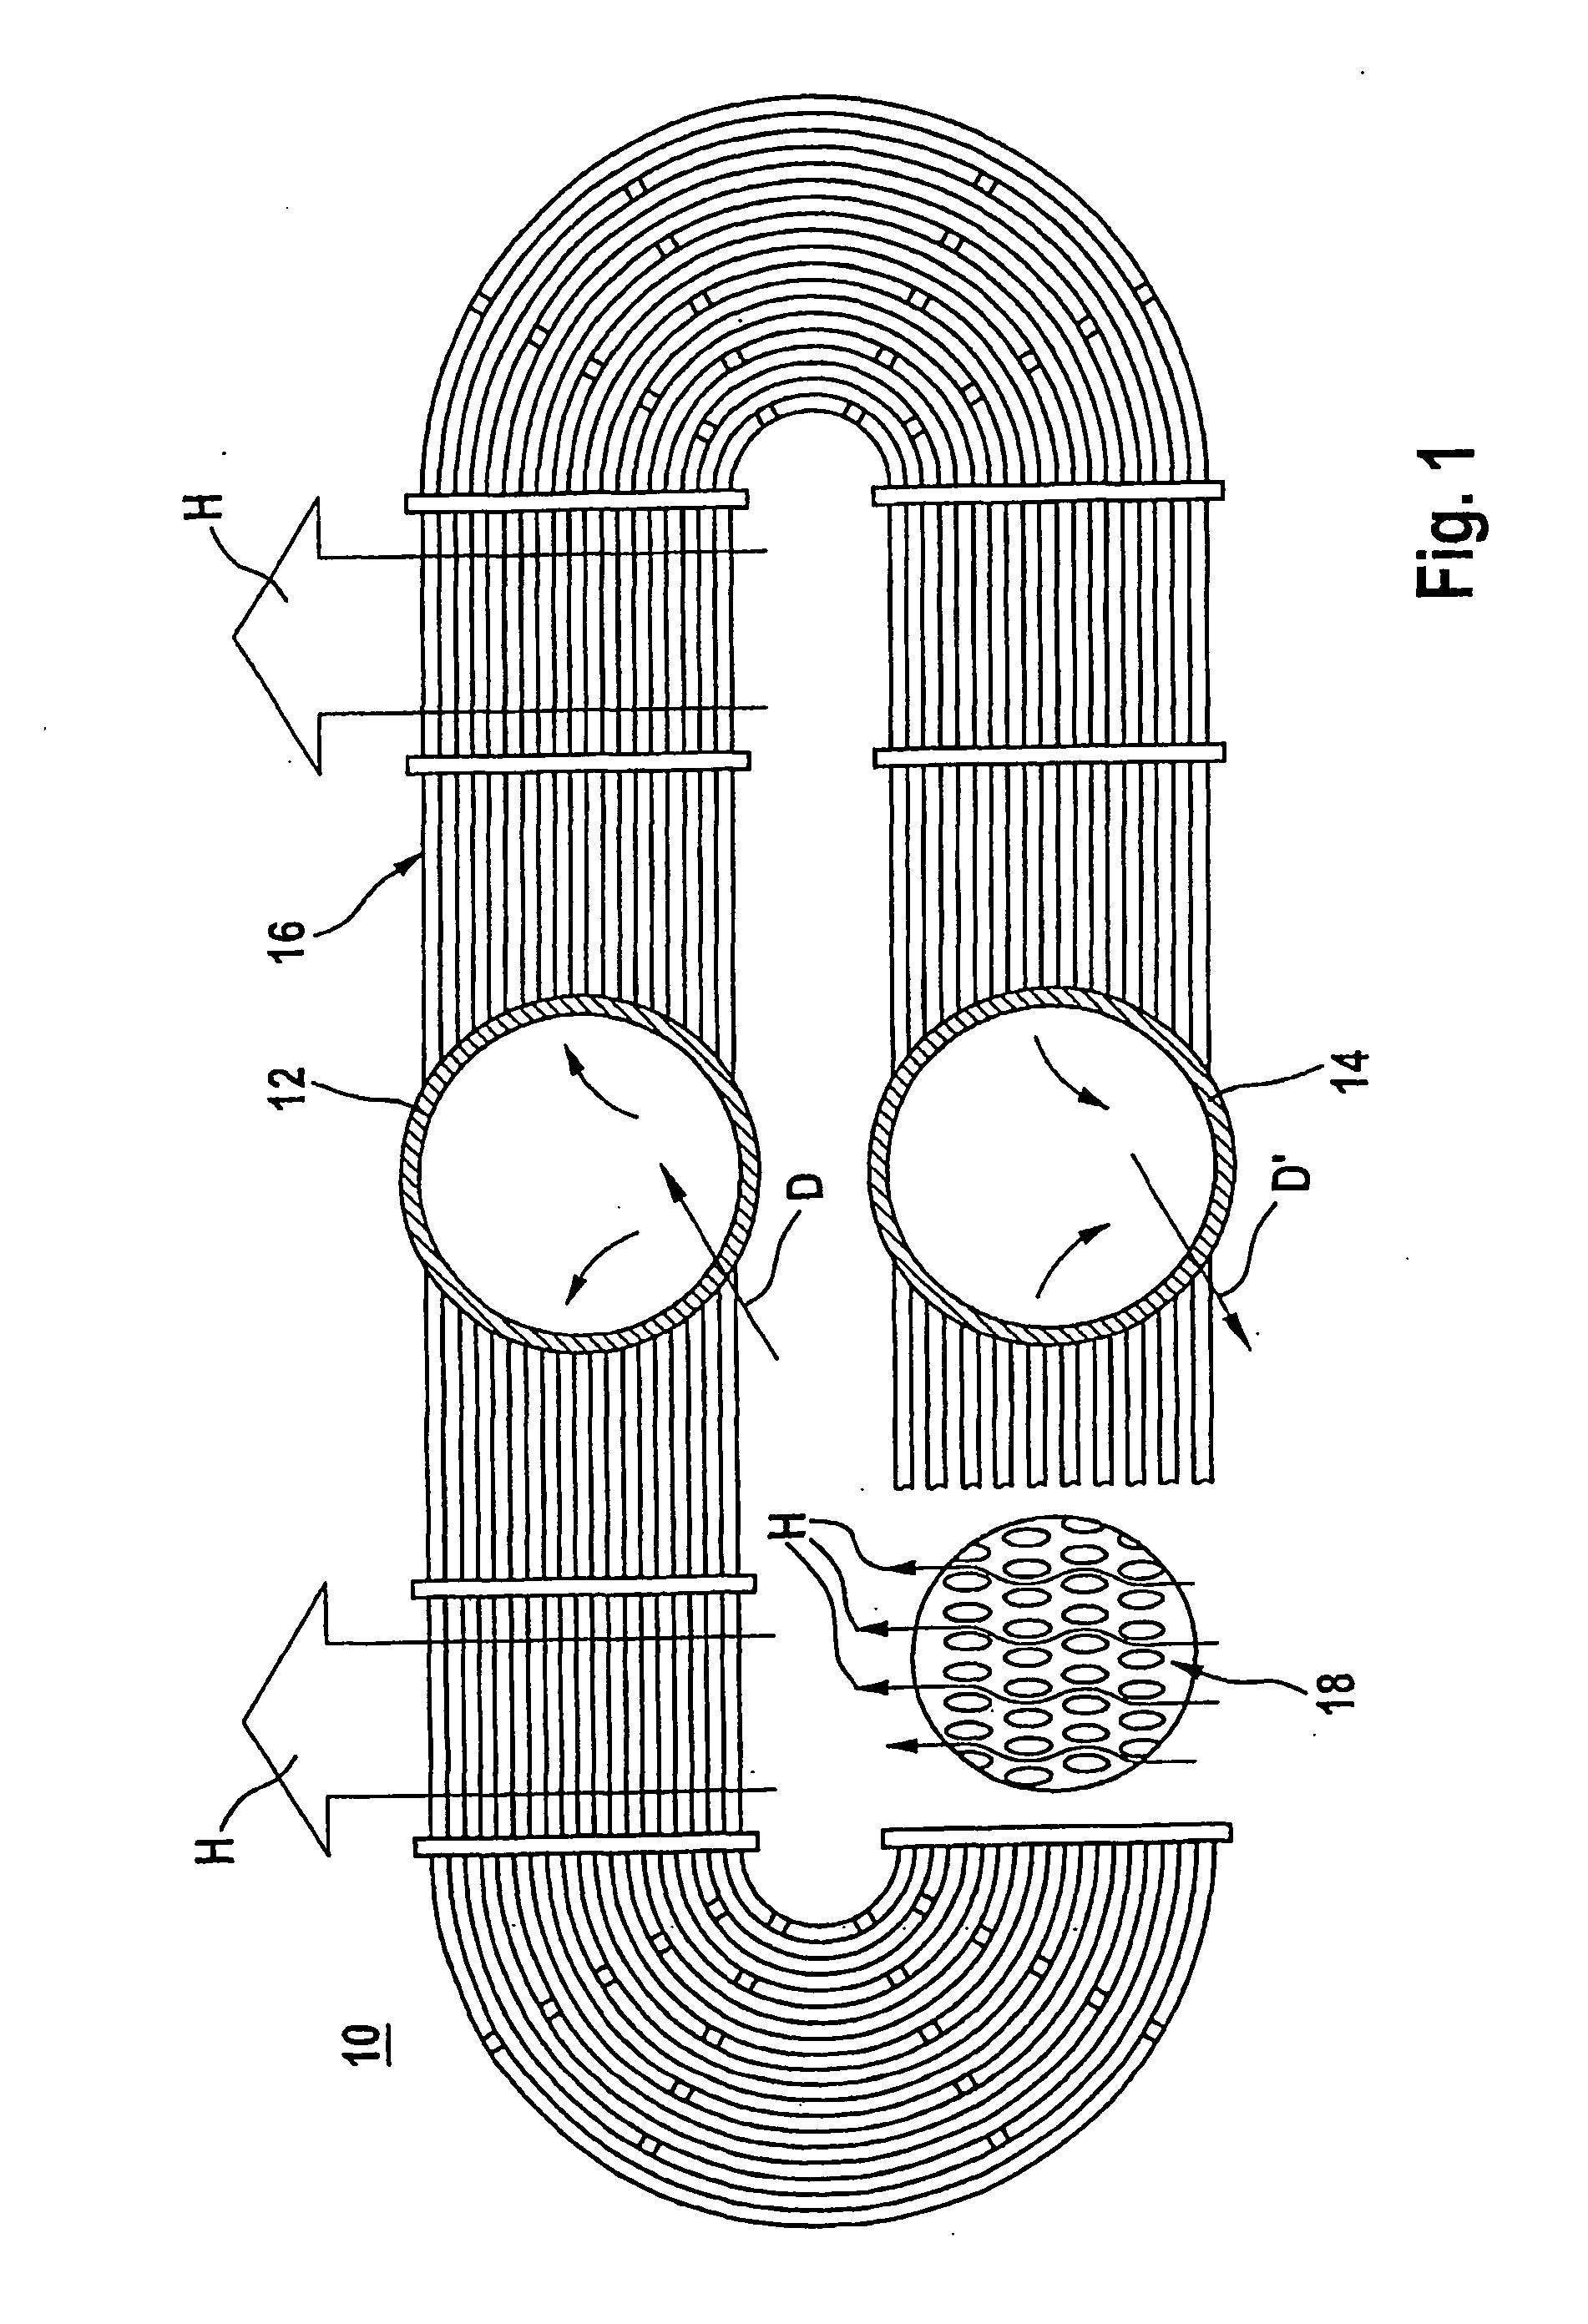 Method for producing heat exchanger tubes, which consist of half-tubes or complete tubes and which are provided for recuperative exhaust gas heat exchanger